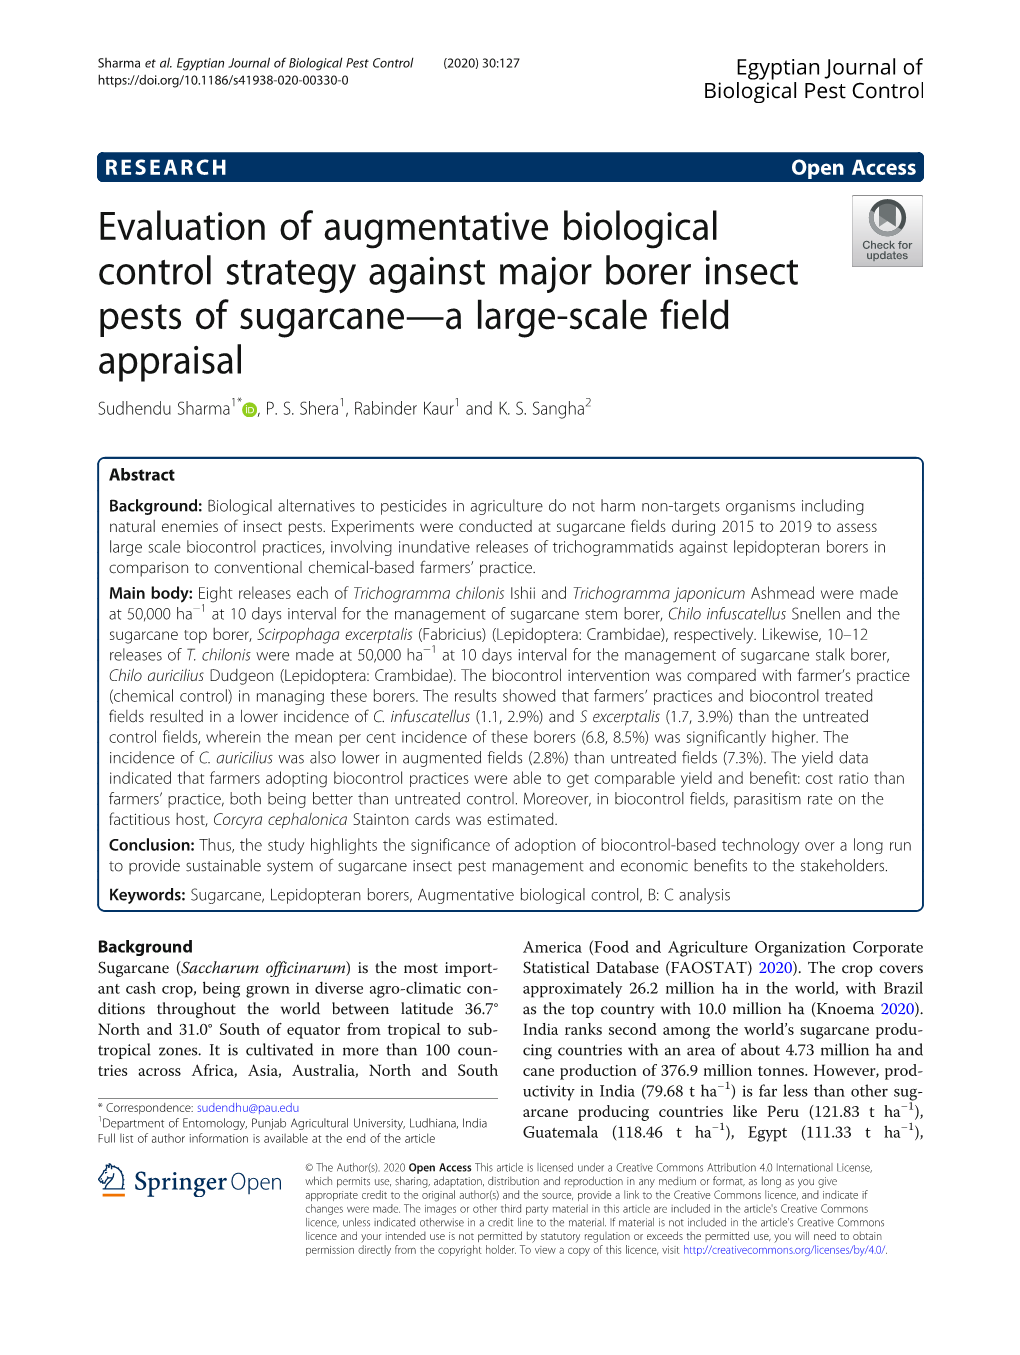 Evaluation of Augmentative Biological Control Strategy Against Major Borer Insect Pests of Sugarcane—A Large-Scale Field Appraisal Sudhendu Sharma1* , P